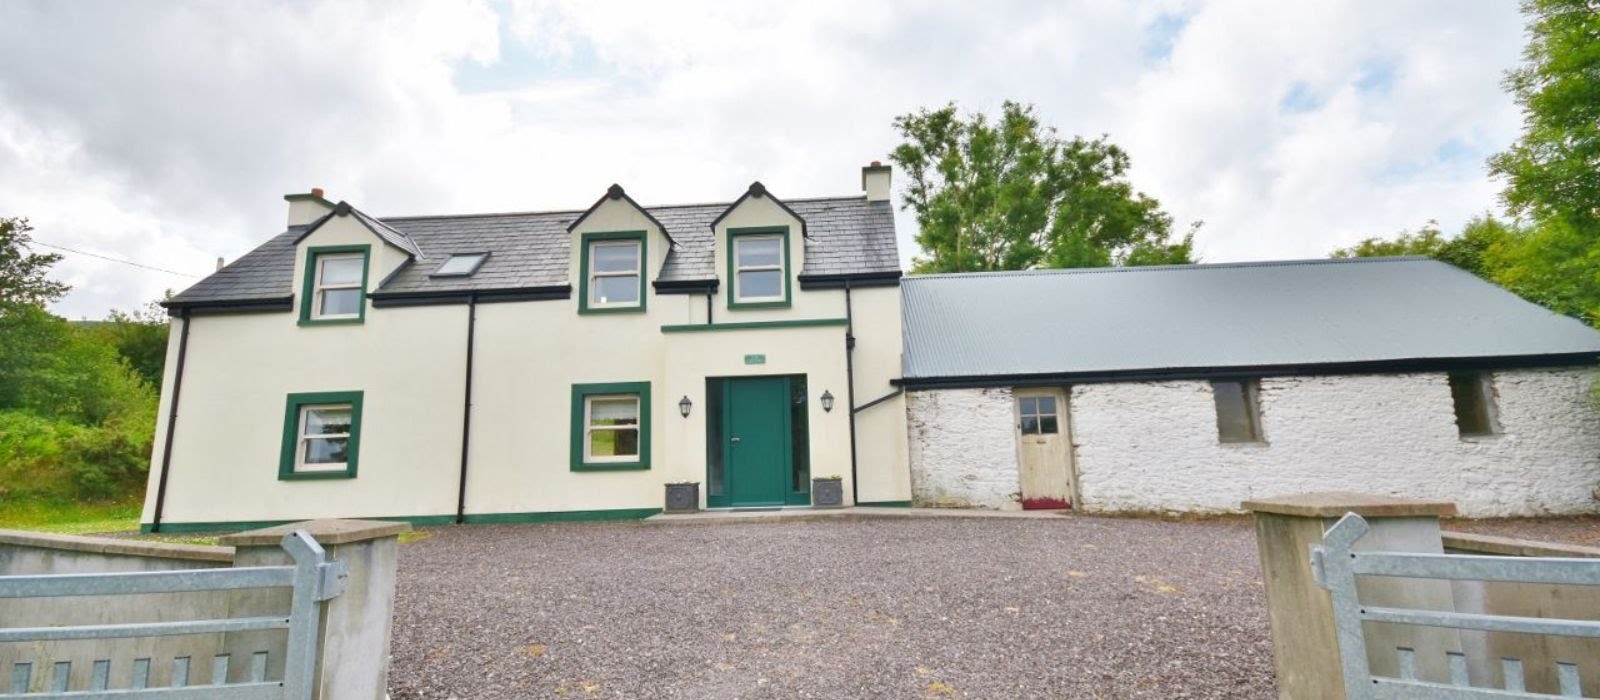 Daisy Cottage: This Kerry cottage at the foot of the Slieve Mish mountains is on the market for €300,000